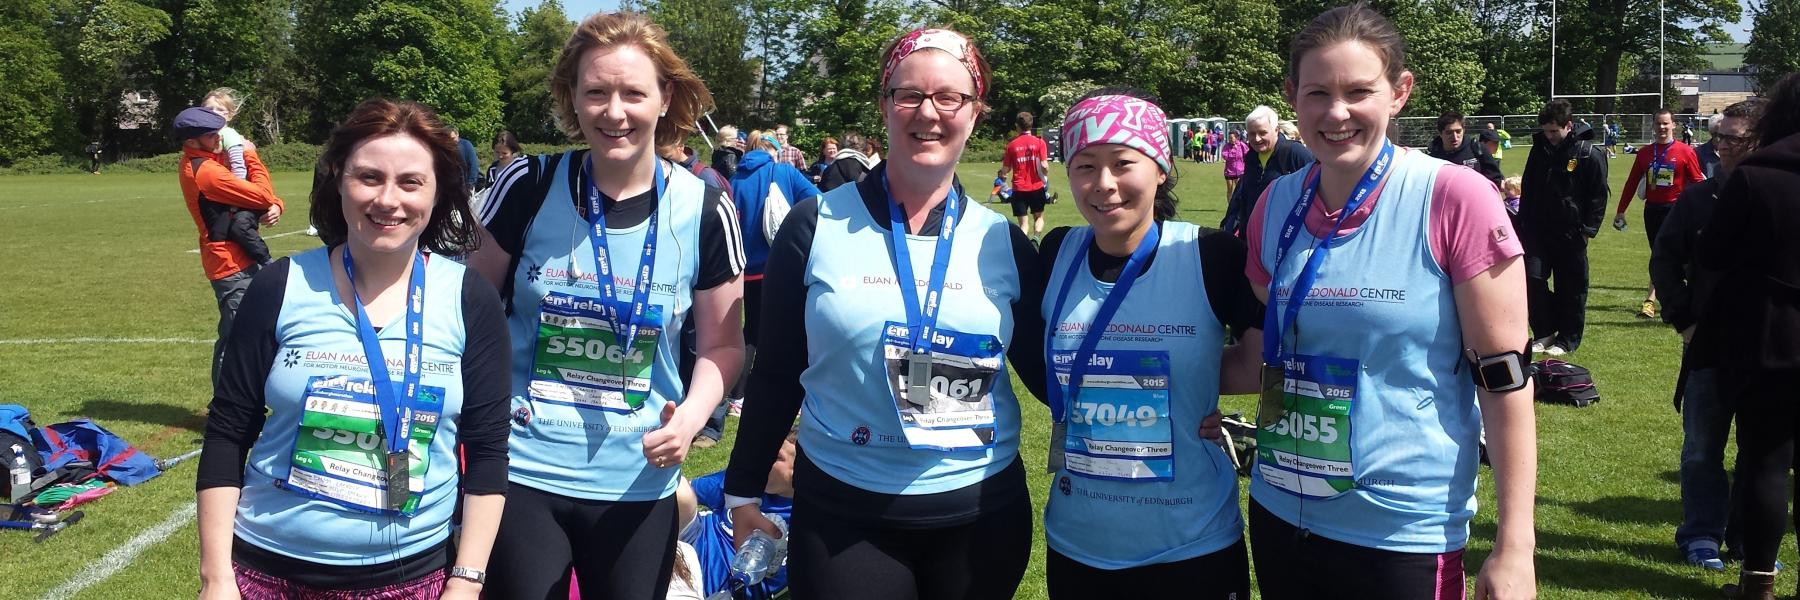 a group of runners wearing medals and Euan MacDonald Centre T-shirts, having just completed the Edinburgh Marathon relay